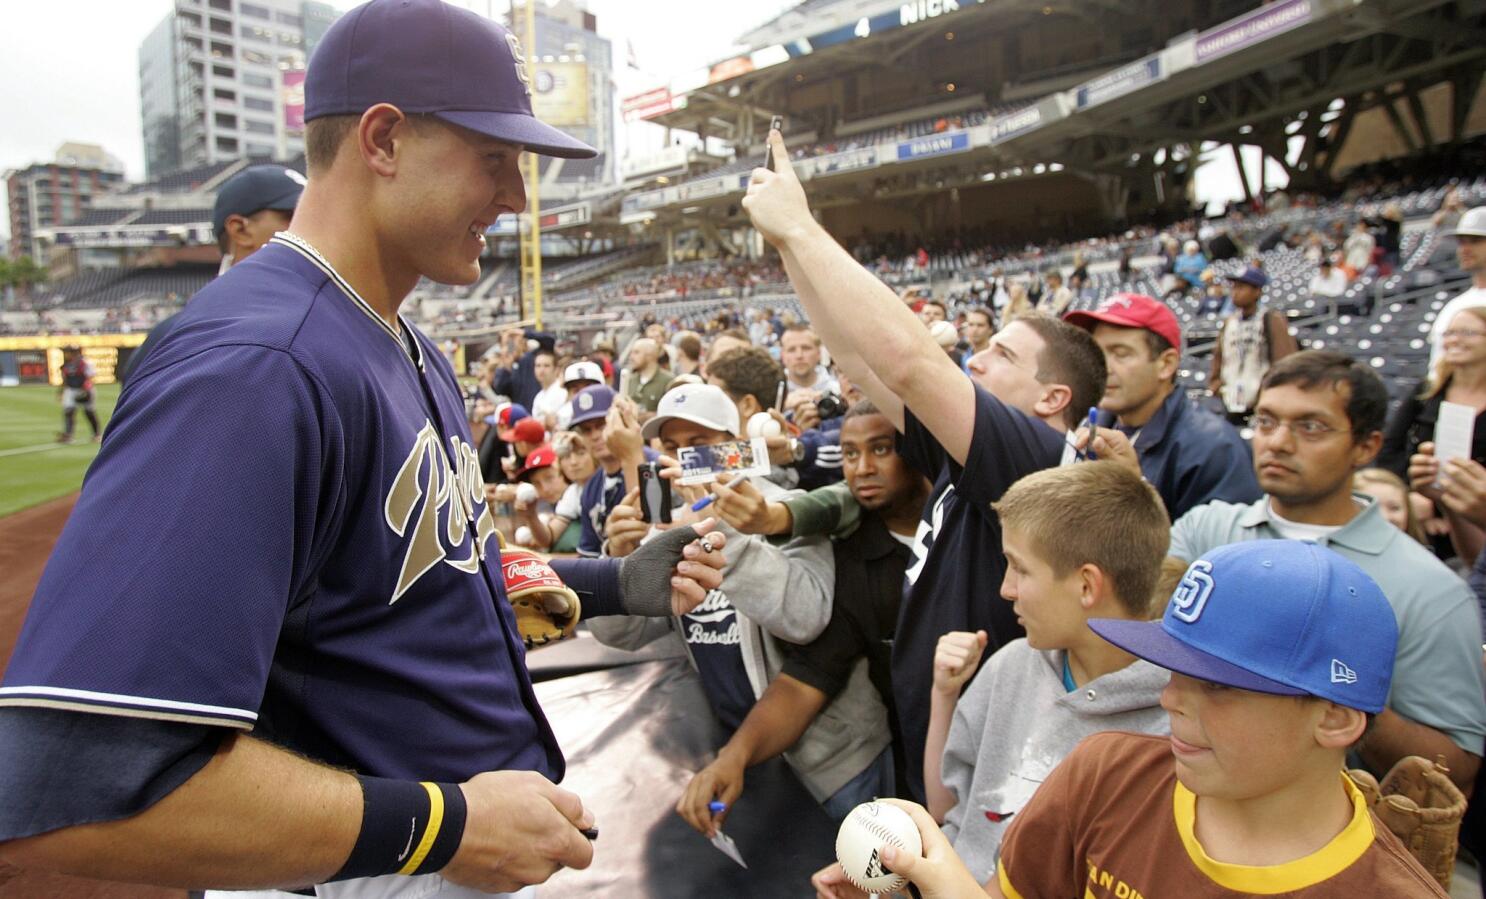 Anthony Rizzo made his major league debut with the Padres five years ago -  Gaslamp Ball